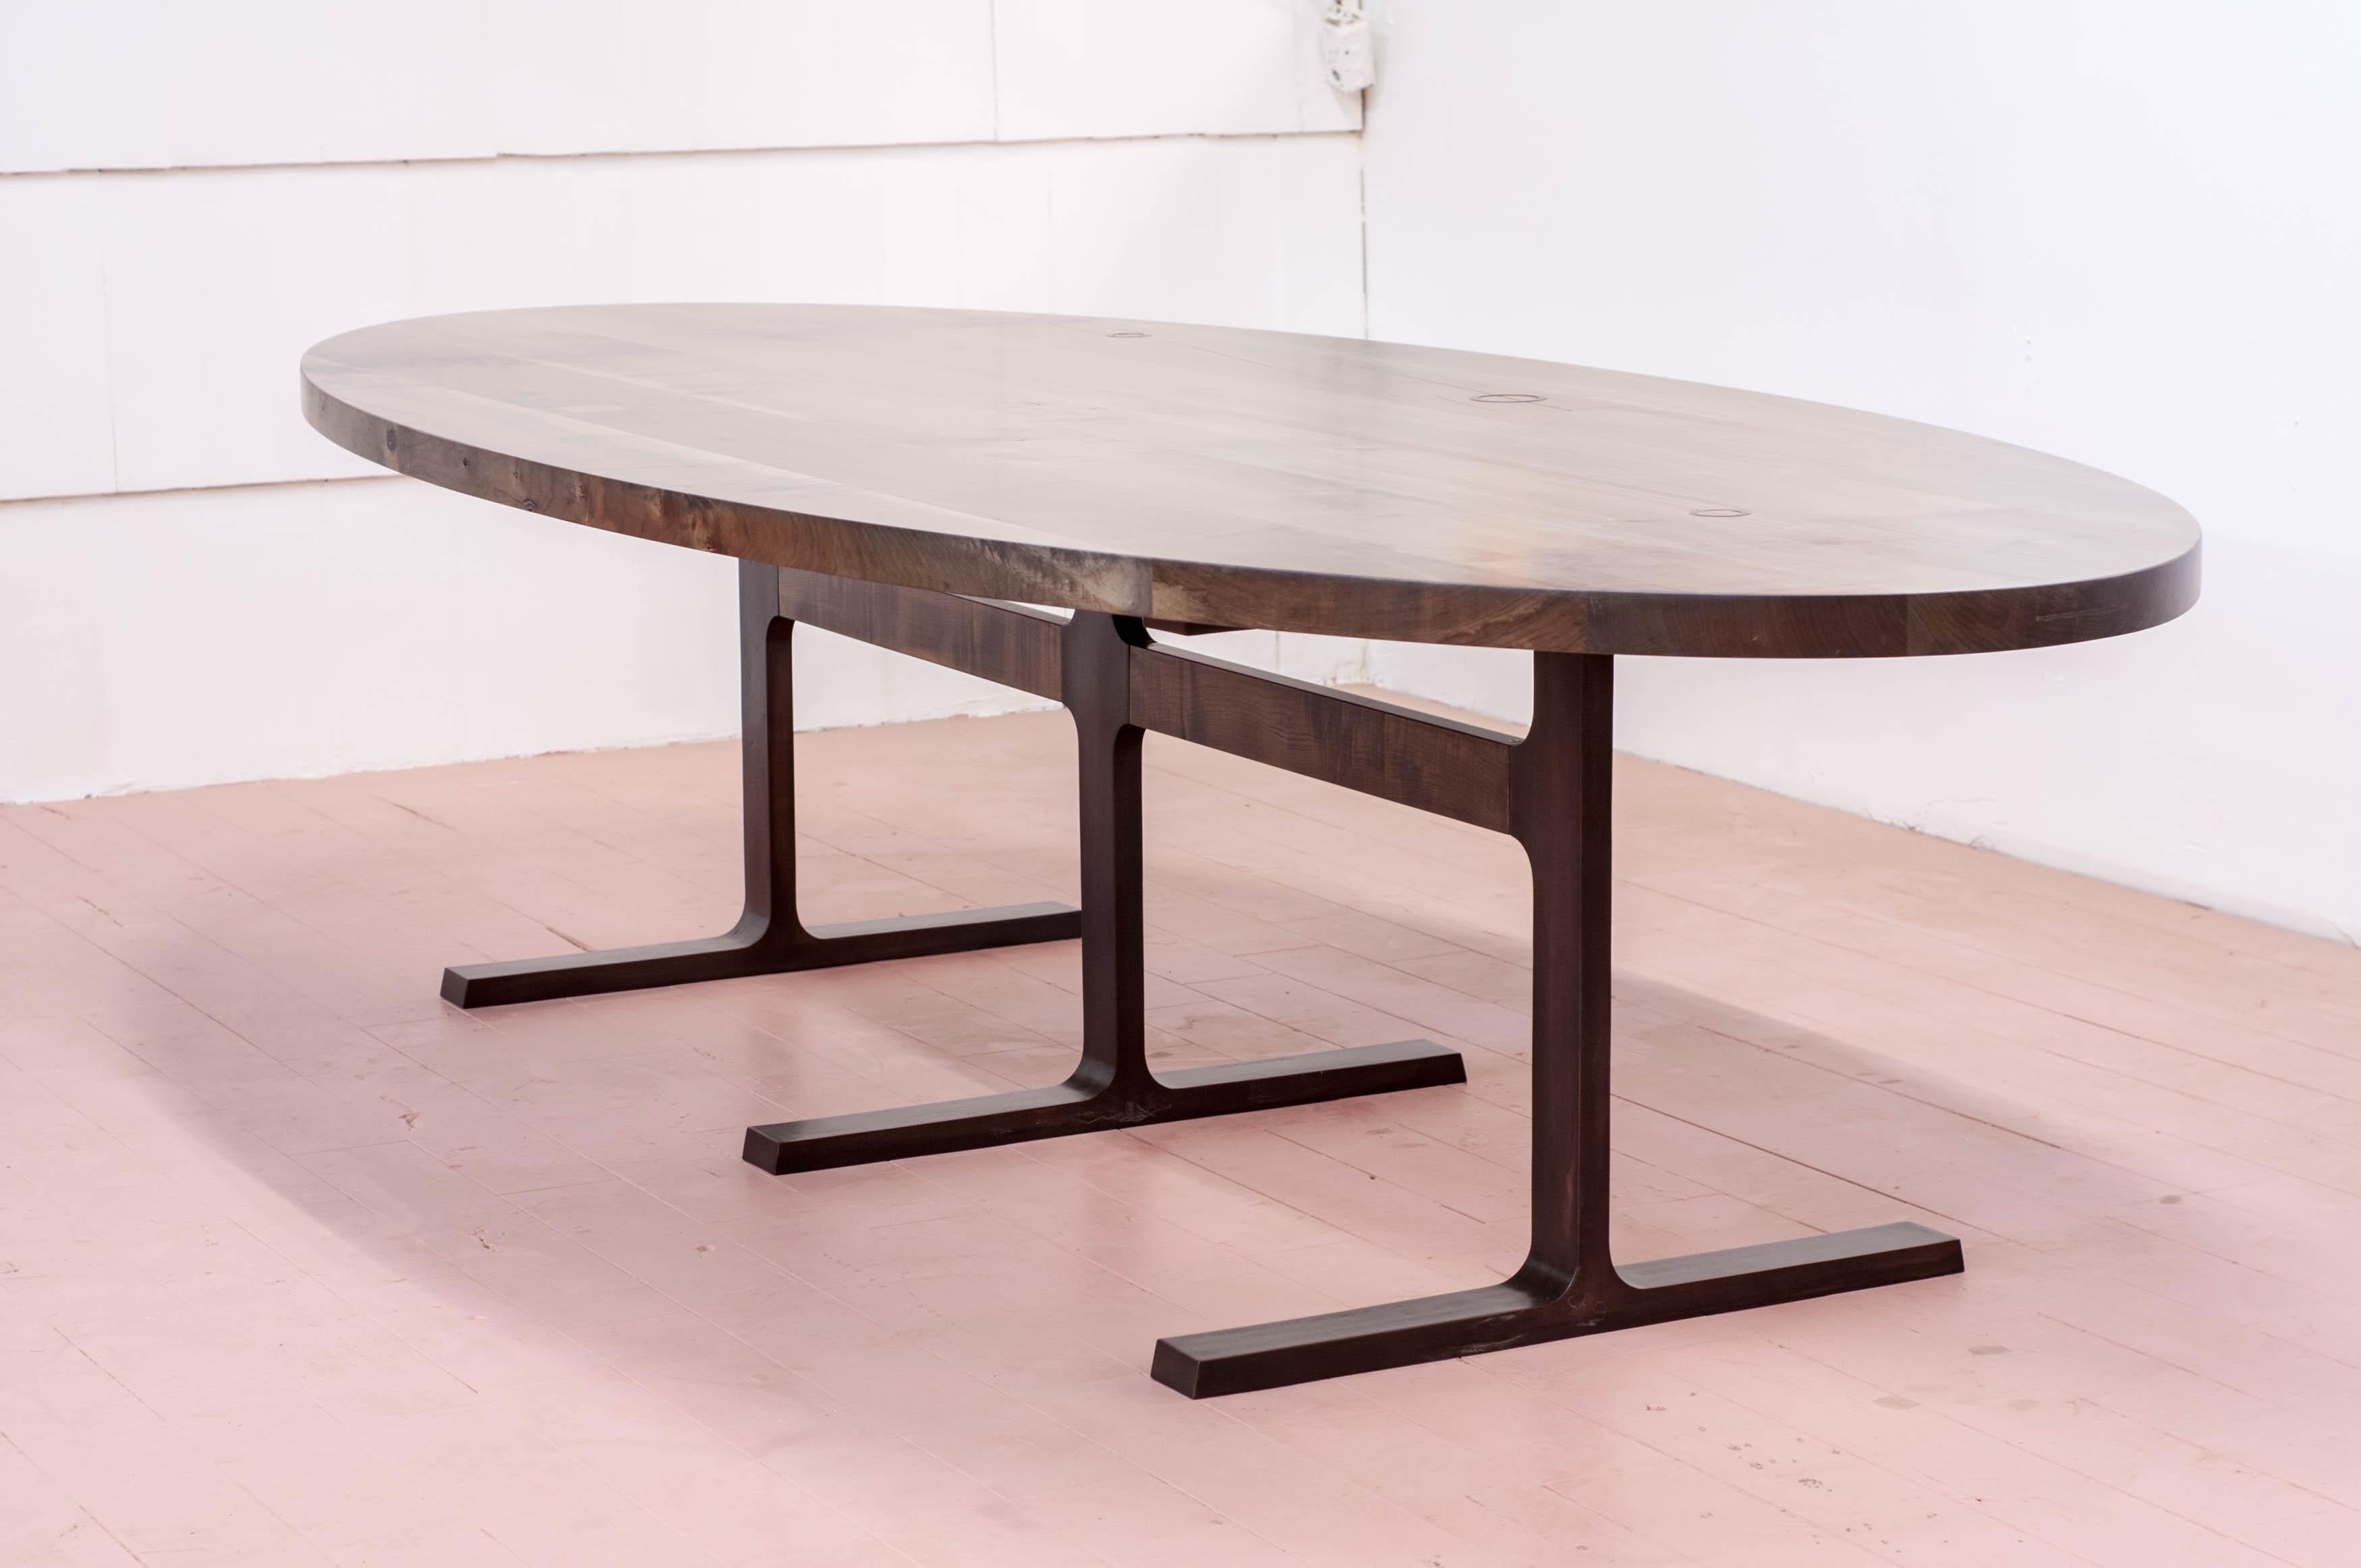 Contemporary Bronze Shaker Table in Oxidized Maple and Blackened Cast Bronze